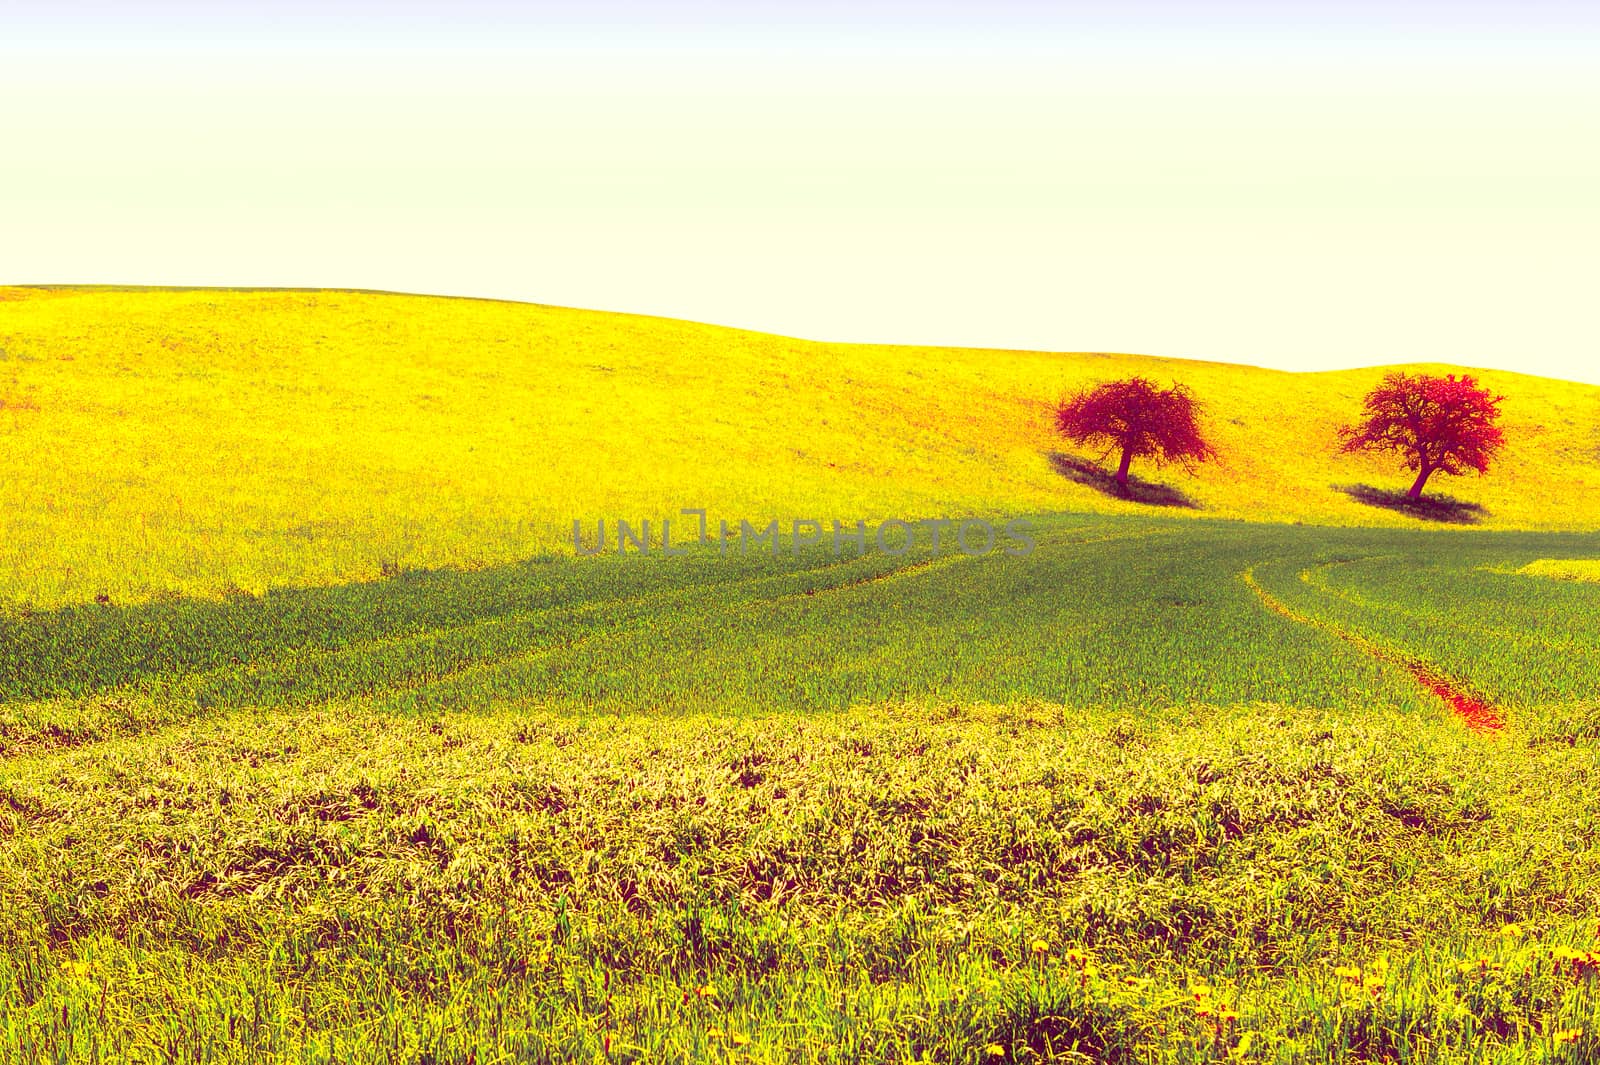 Trees Surrounded by Sloping Meadows in Switzerland, Vintage Style Toned Picture